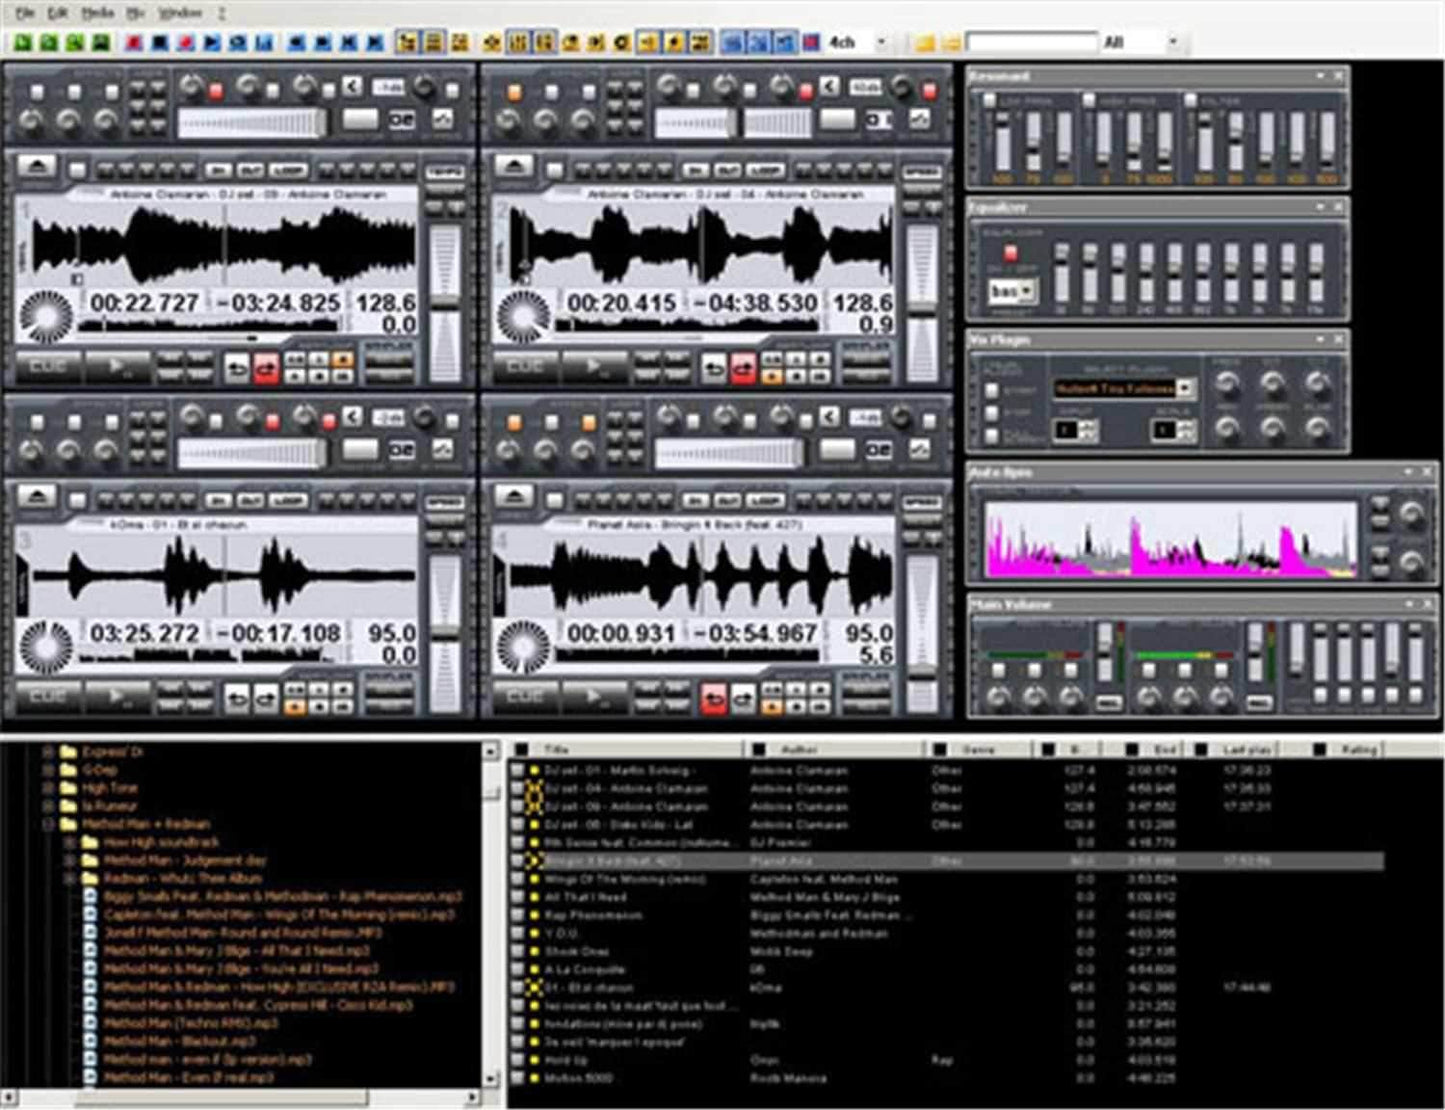 Mixvibes DVS Pro Vinyl Scratch Software Package - PSSL ProSound and Stage Lighting